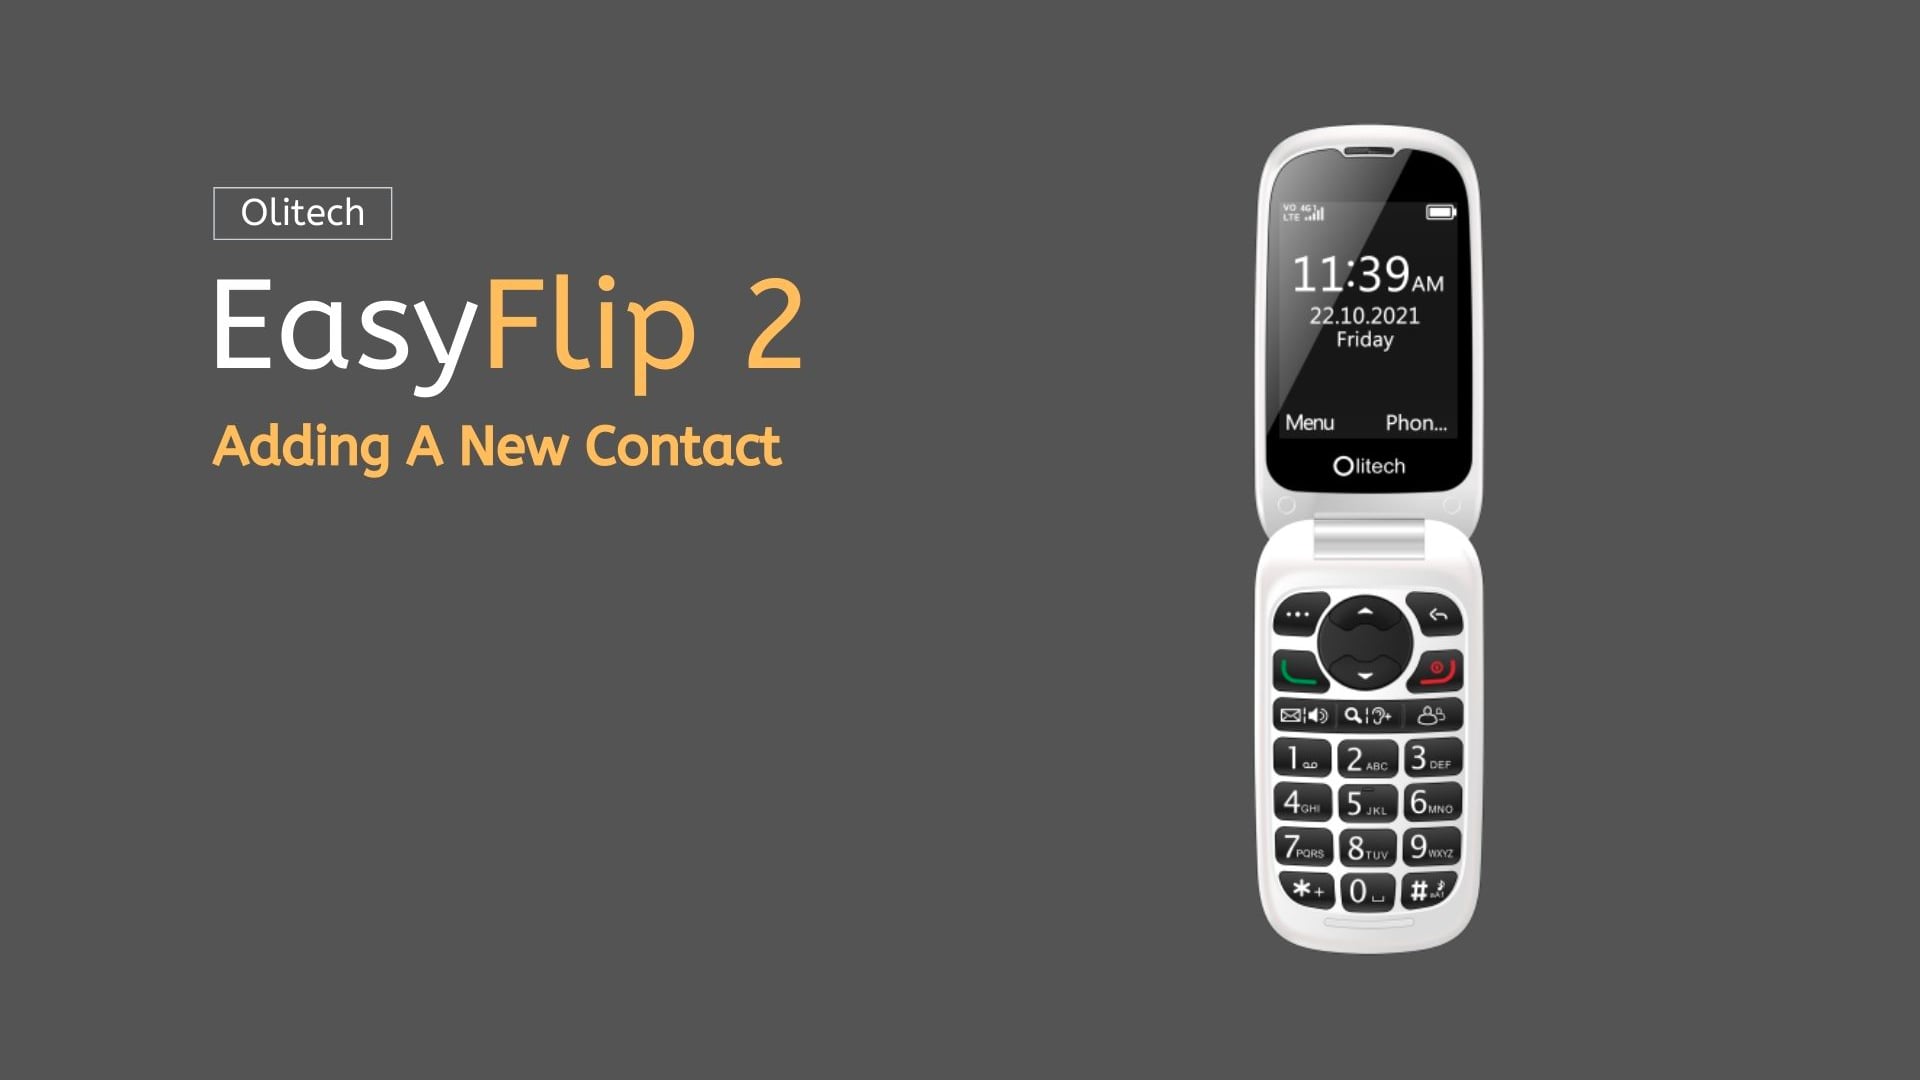 Olitech EasyFlip 2 - Adding A New Contact